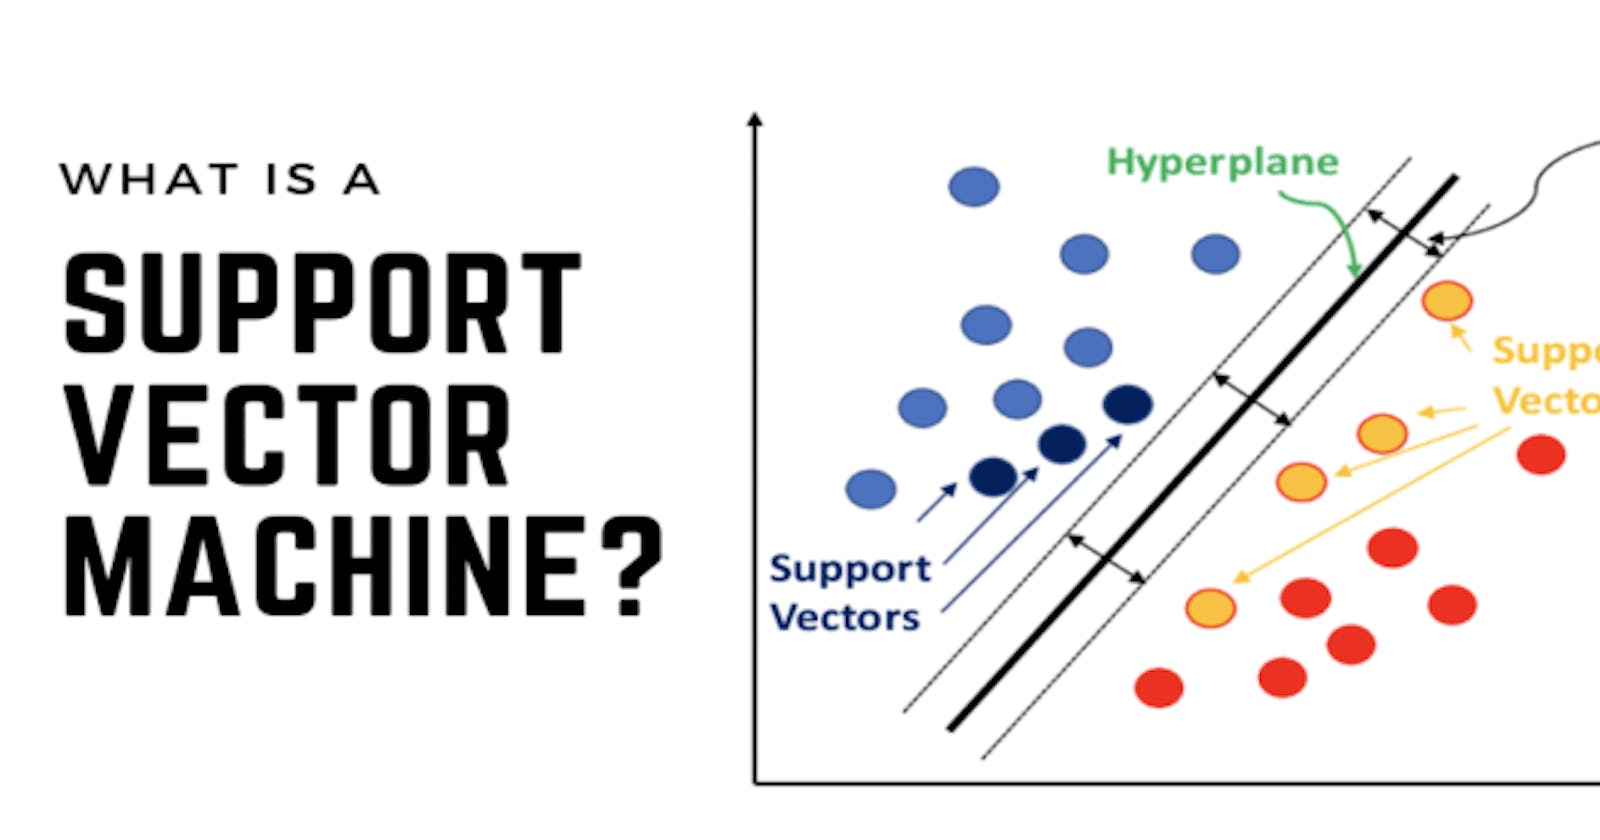 Chapter 5 - Support Vector Machine